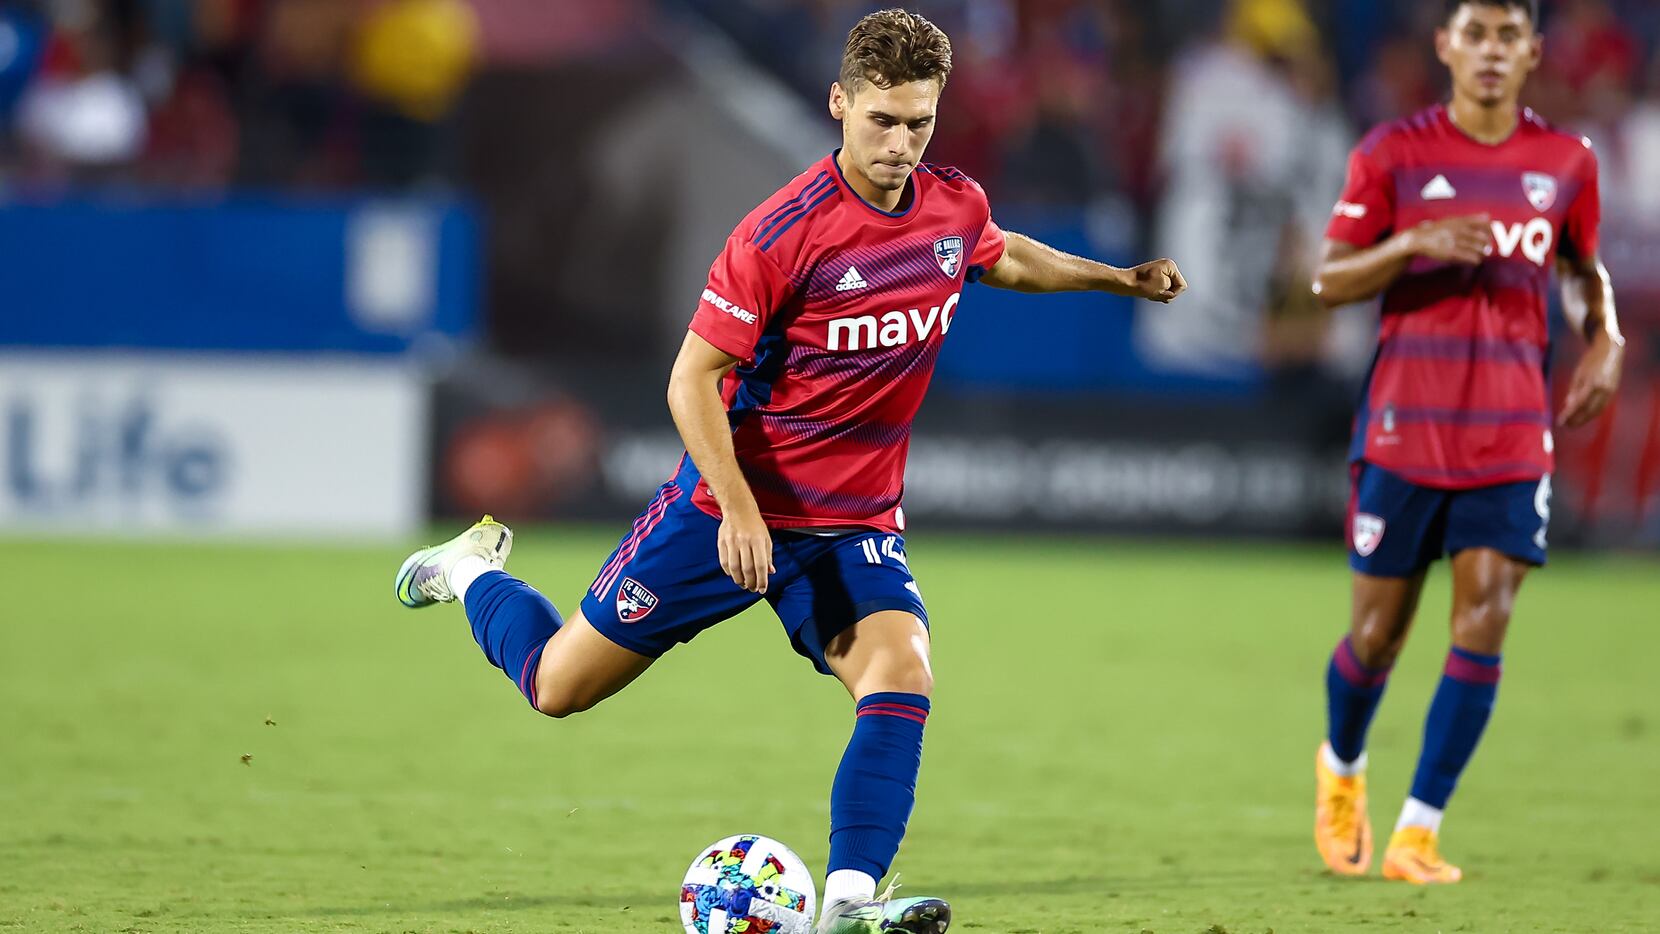 Pictured earlier this summer, FC Dallas forward Beni Redzic logged key minutes in a blowout...